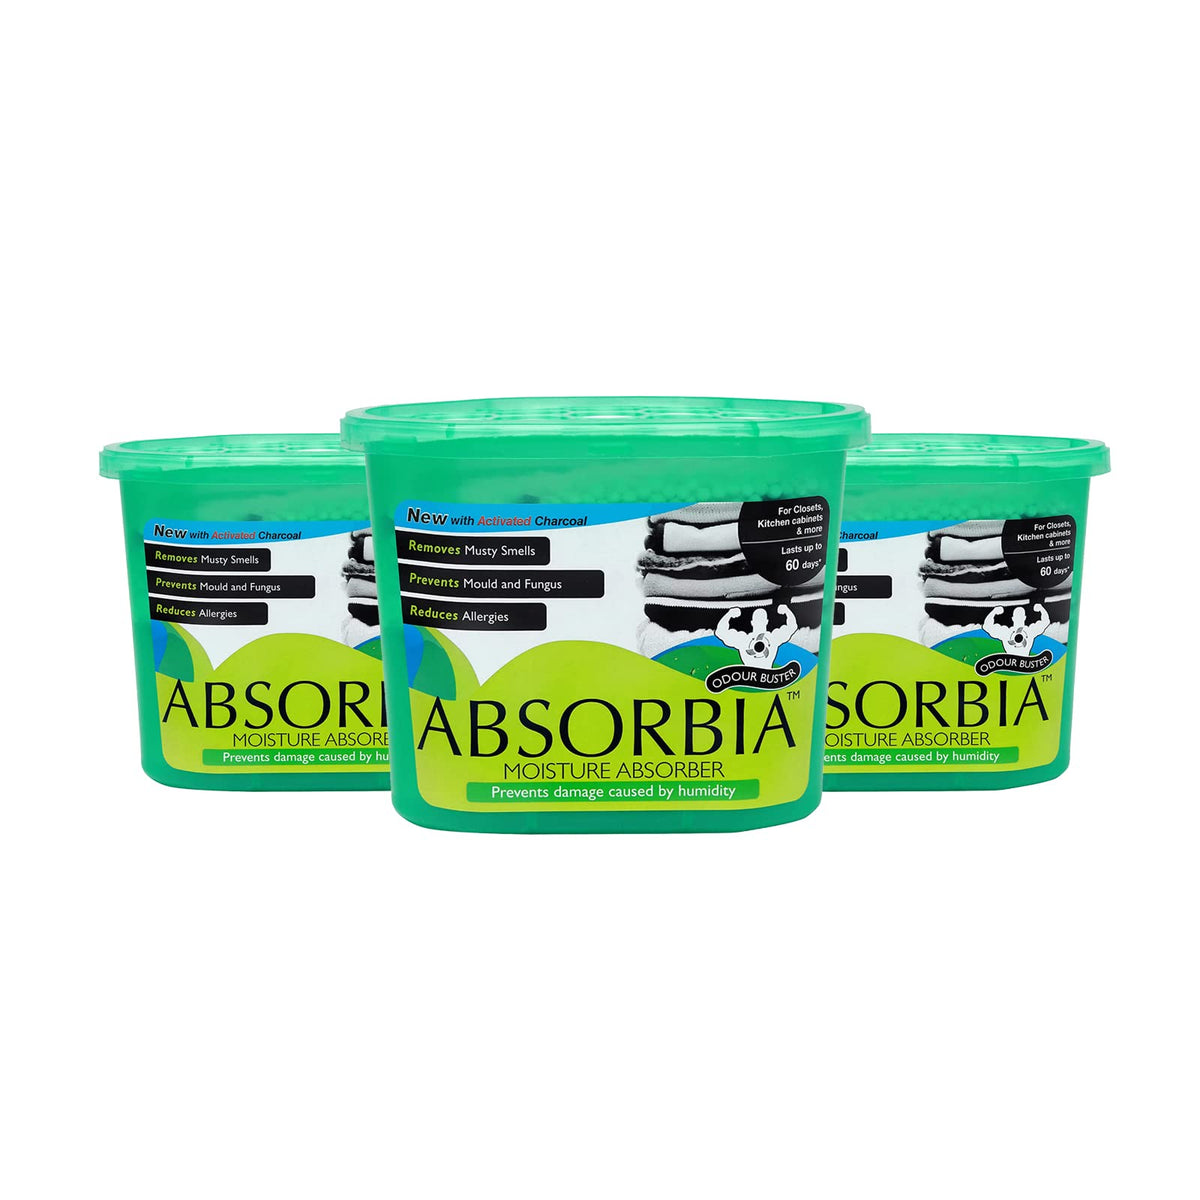 Absorbia Moisture Absorber & Odour Buster with Activated Charcoal |Family Pack of 3 (300 gms X 3 Boxes) |Absorption Capacity 600ml Each Box |for Wardrobe etc |Fights Against Mould & Musty smells…